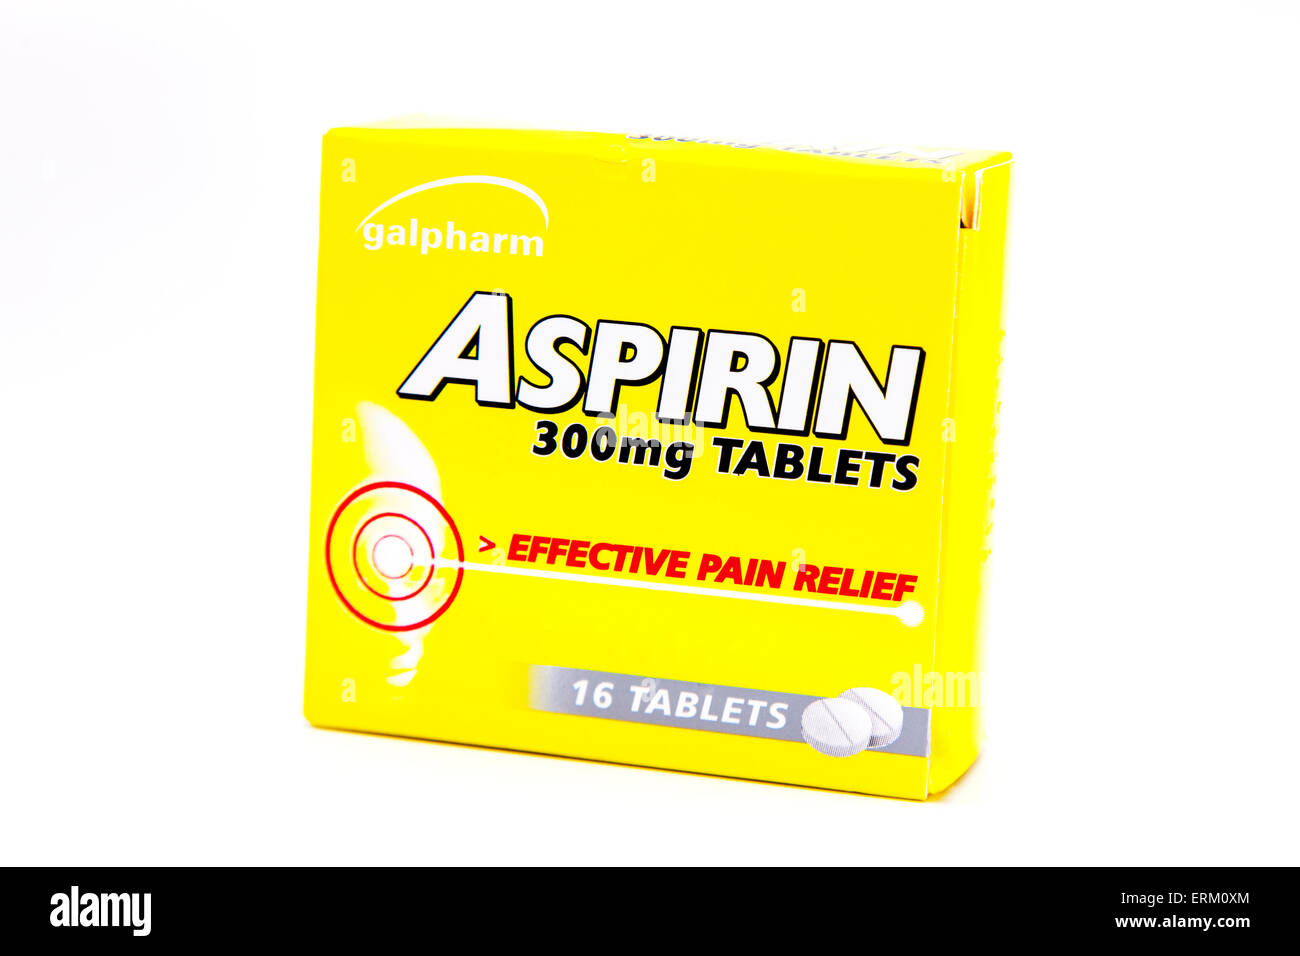 Aspirin pain relief remedy tablets carton caplets box pack packet isolated cutout cut out white background copy space studio Stock Photo